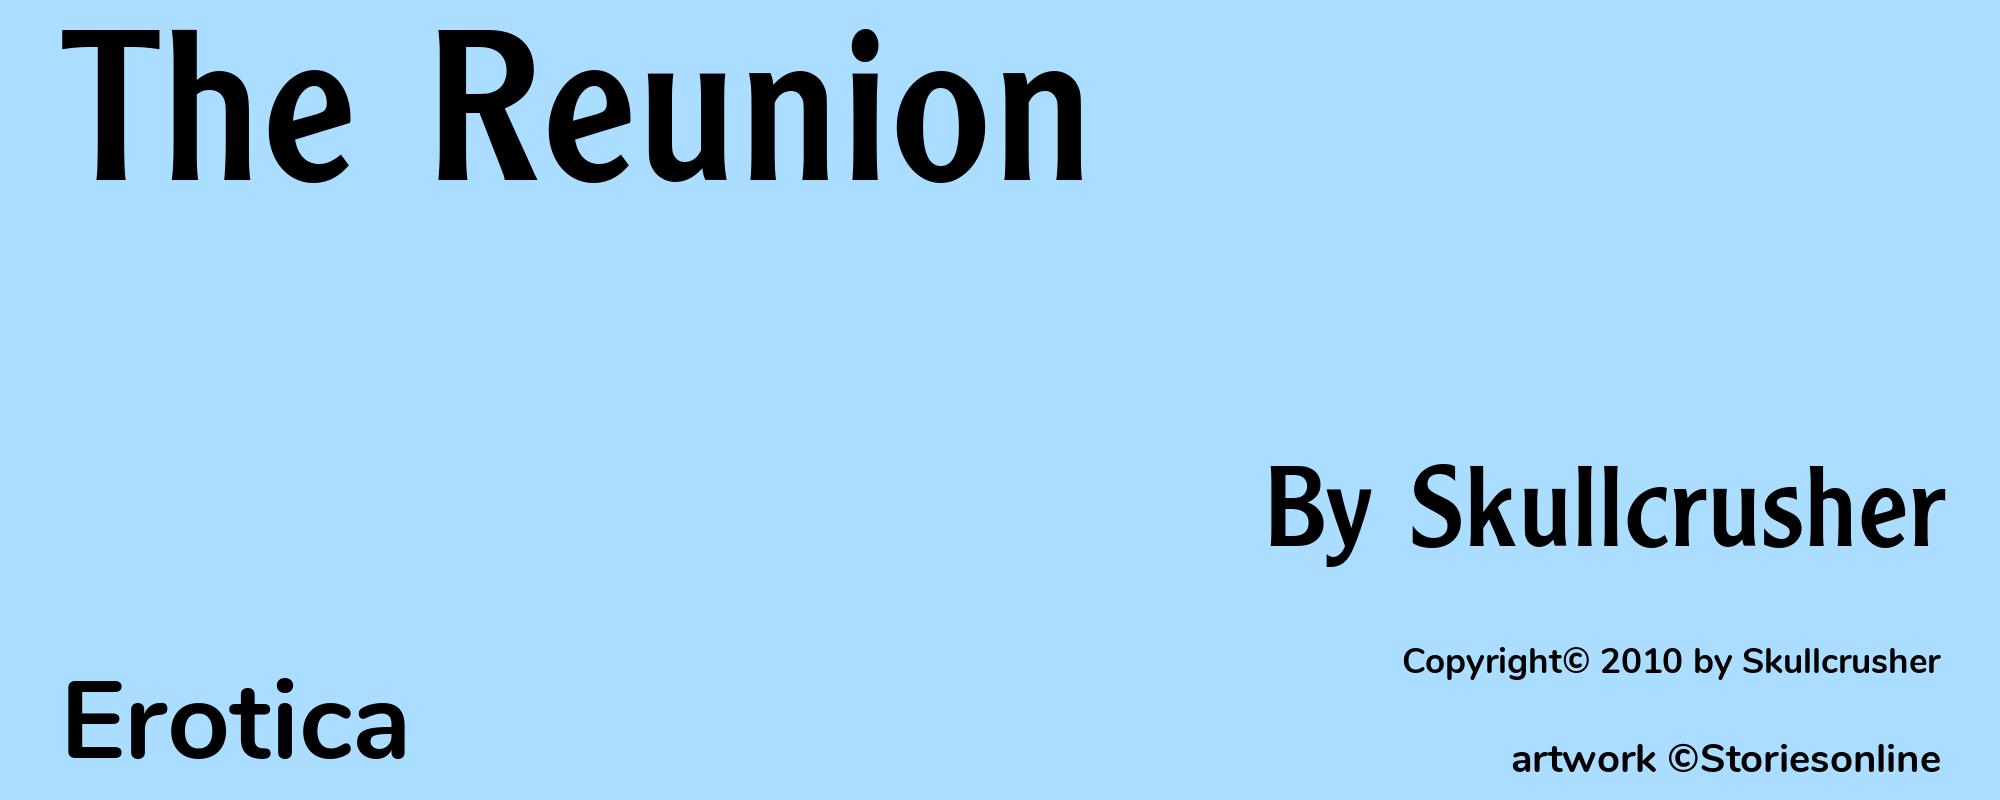 The Reunion - Cover